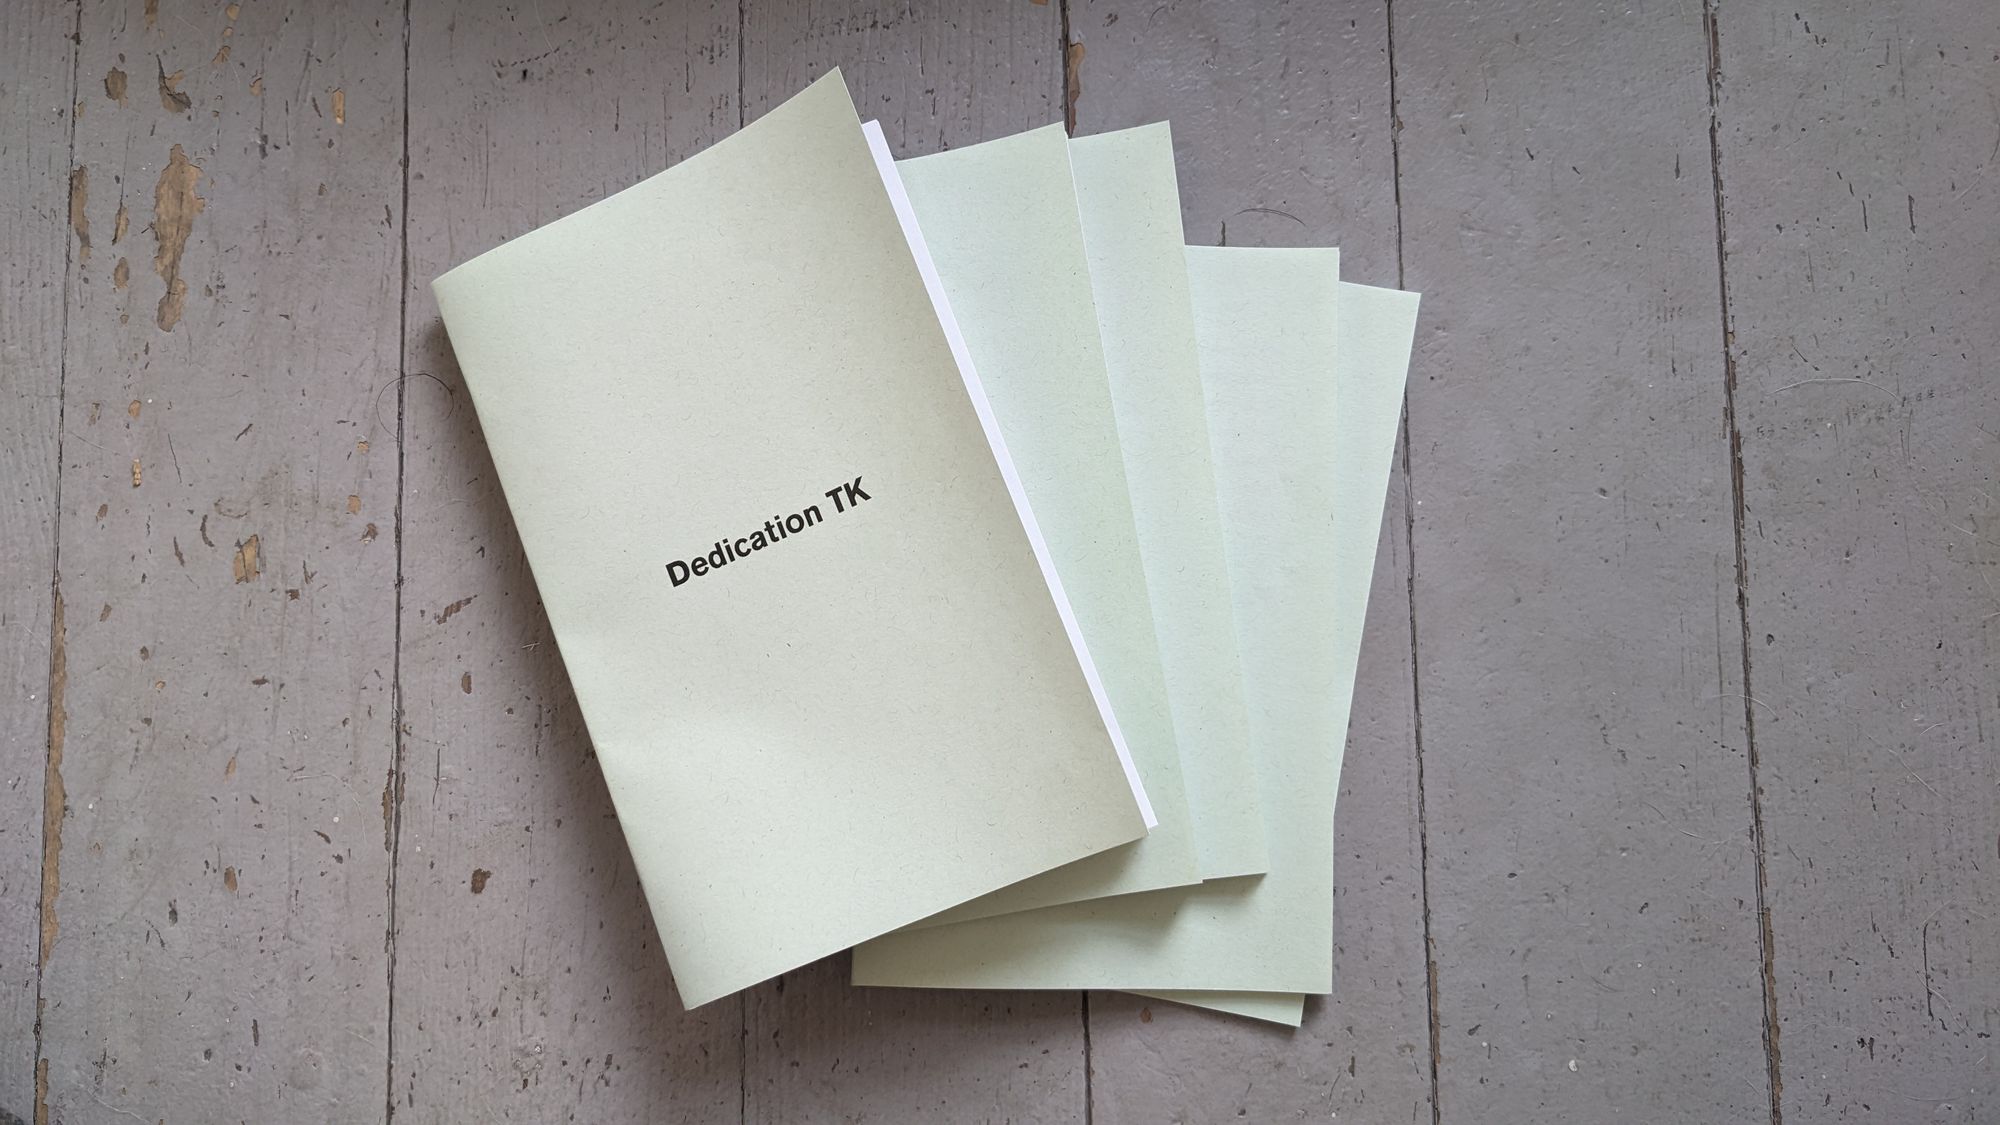 Five copies of a half-letter zine with a light green cover against gray floorboards.